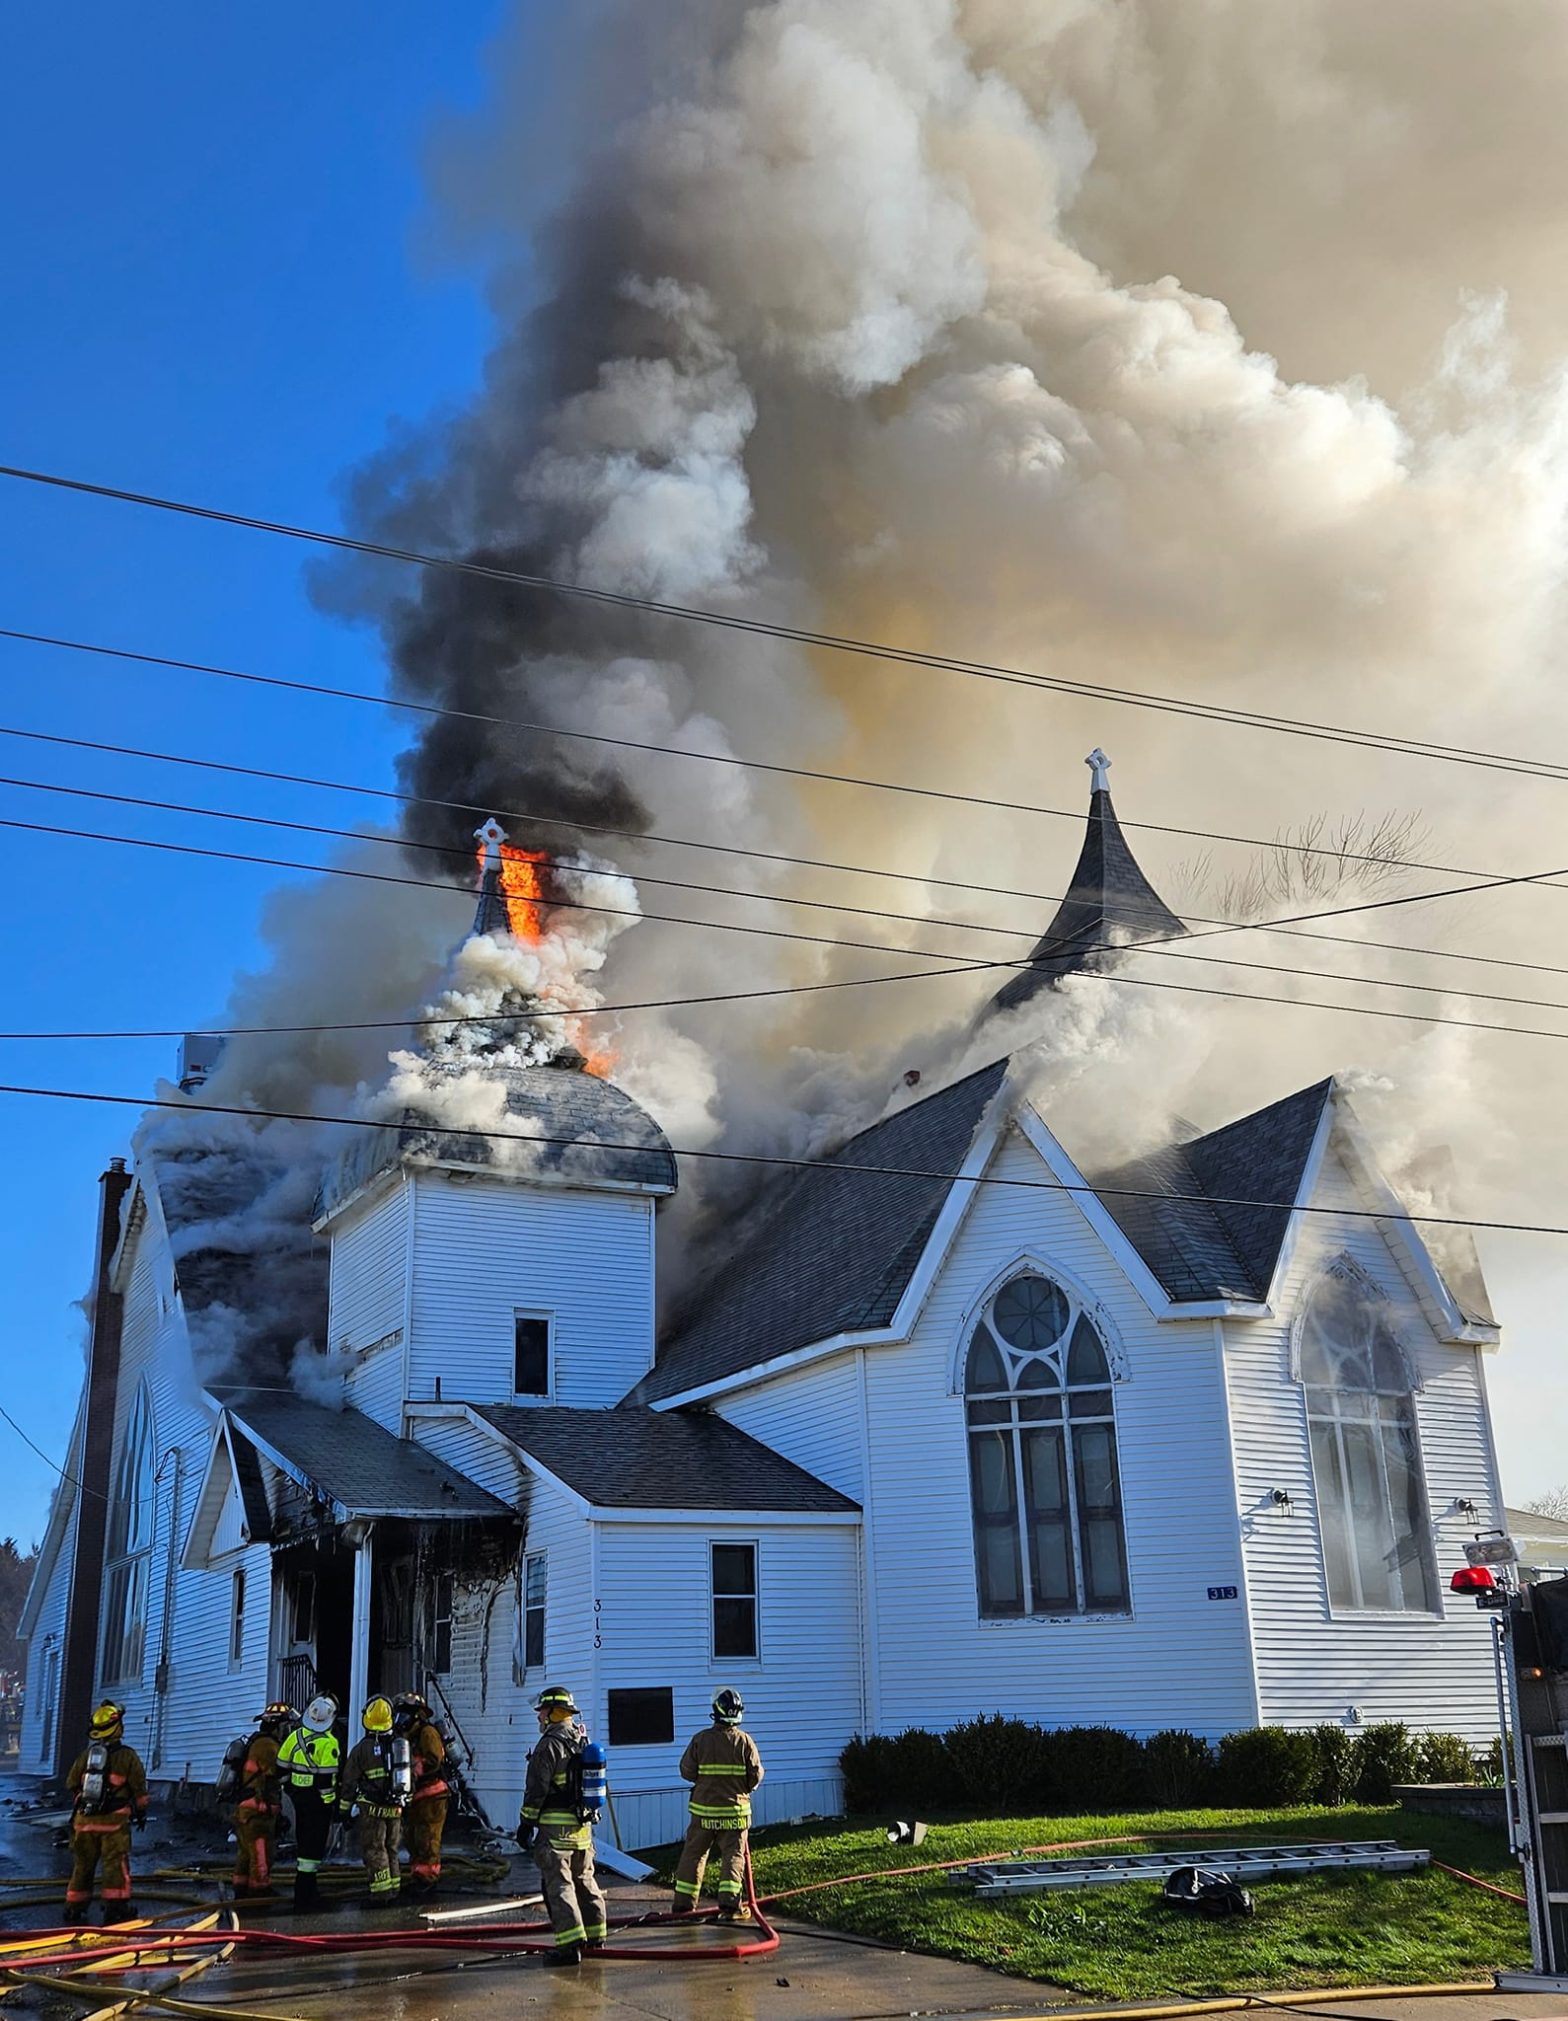 Flames and smoke emerge from large white wooden church as firefighters aim to control the blaze.